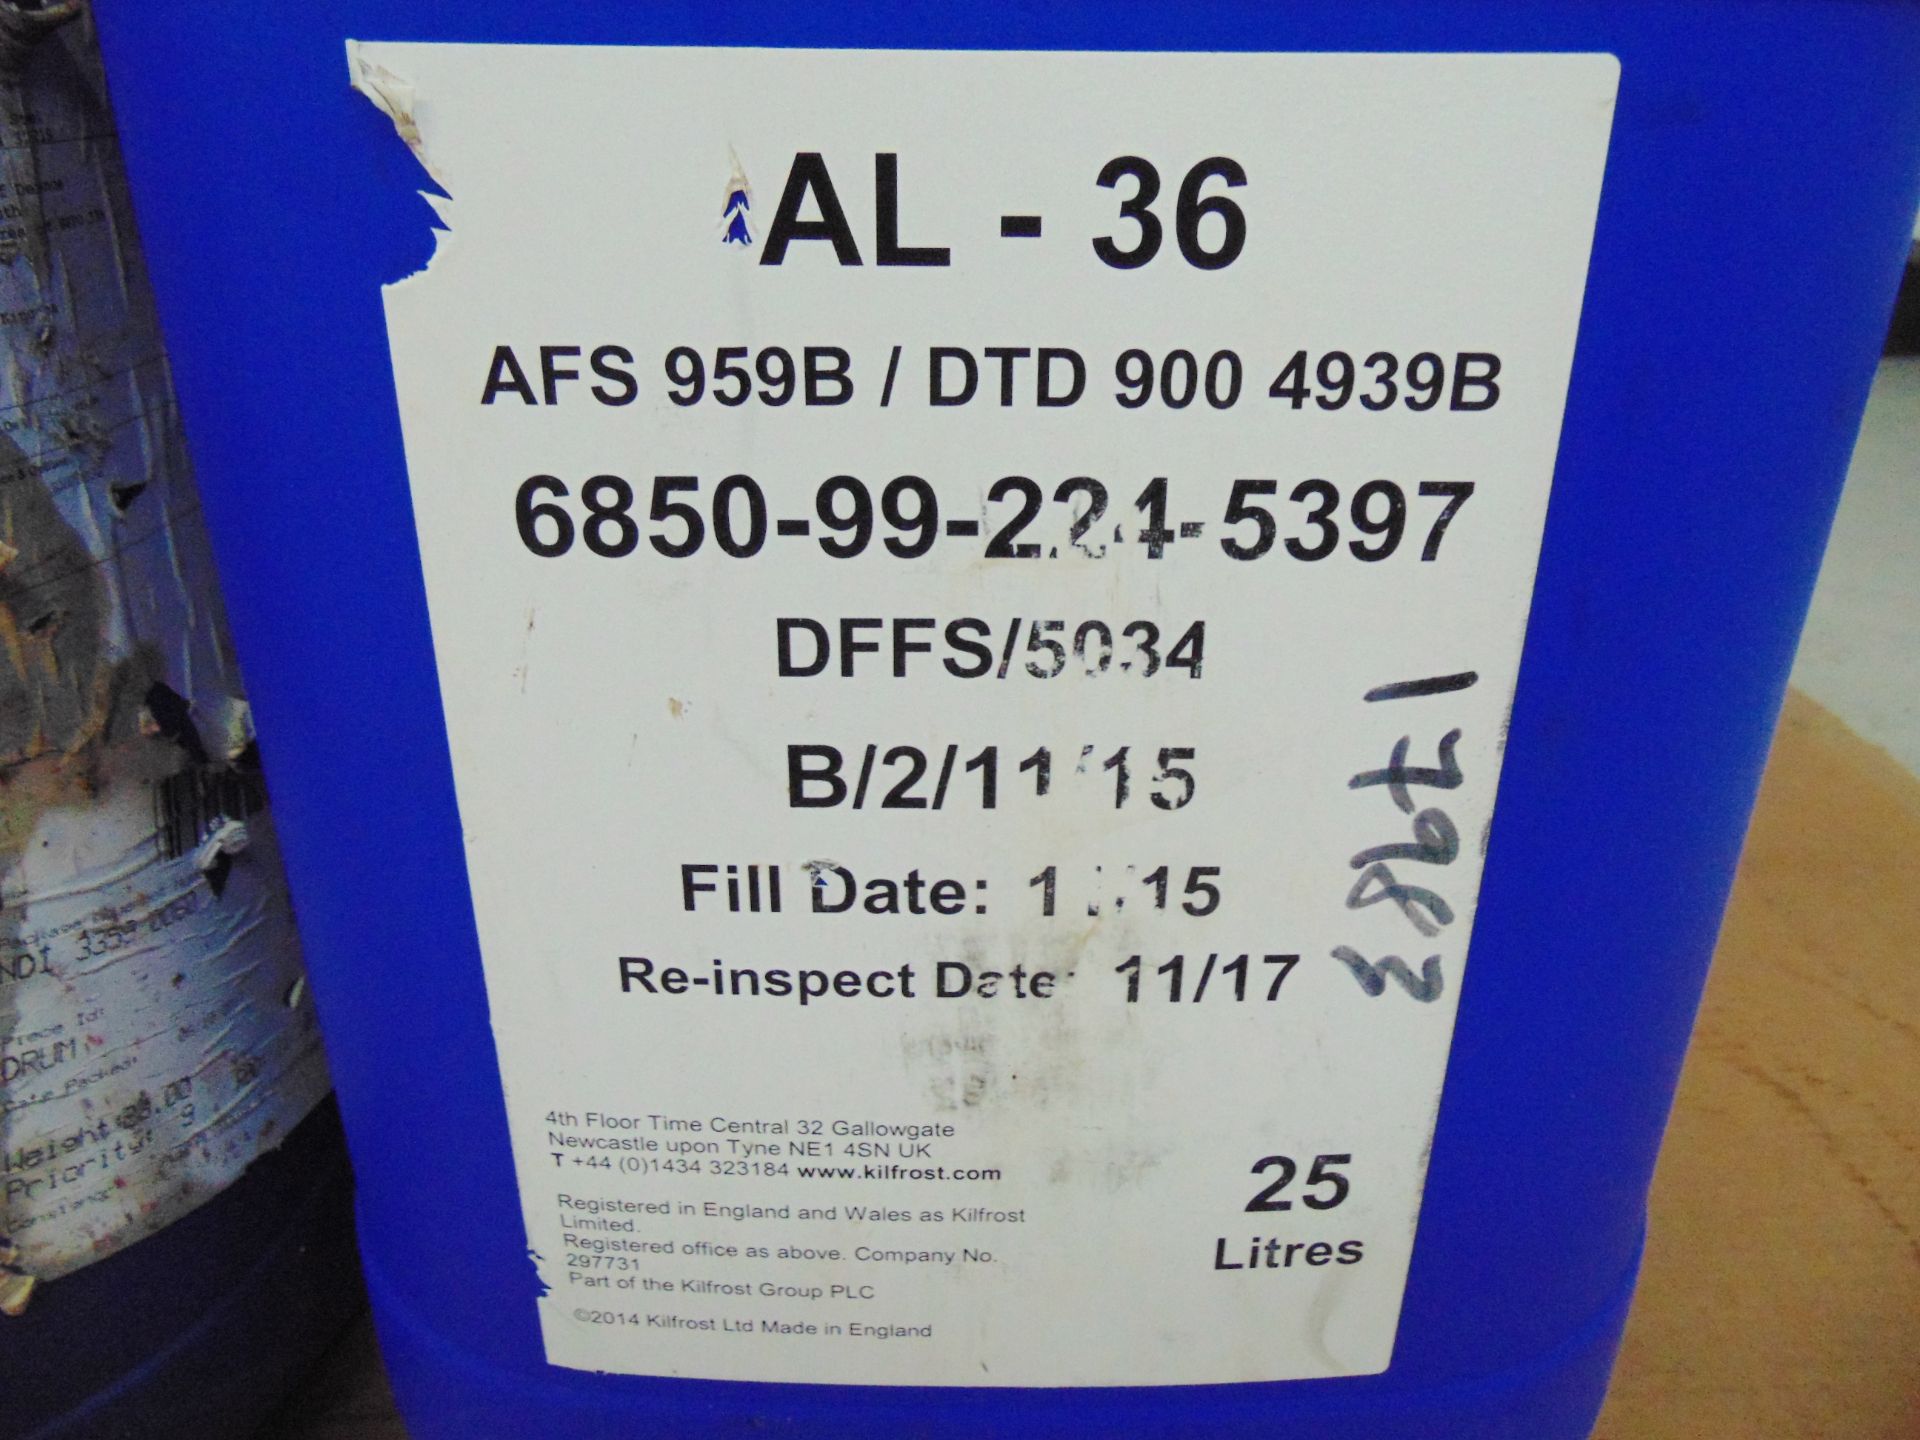 2 x Unissued 25L Tubs of Kilfrost AL-36 Aircraft Windscreen Washer & De-Icer - Image 3 of 3